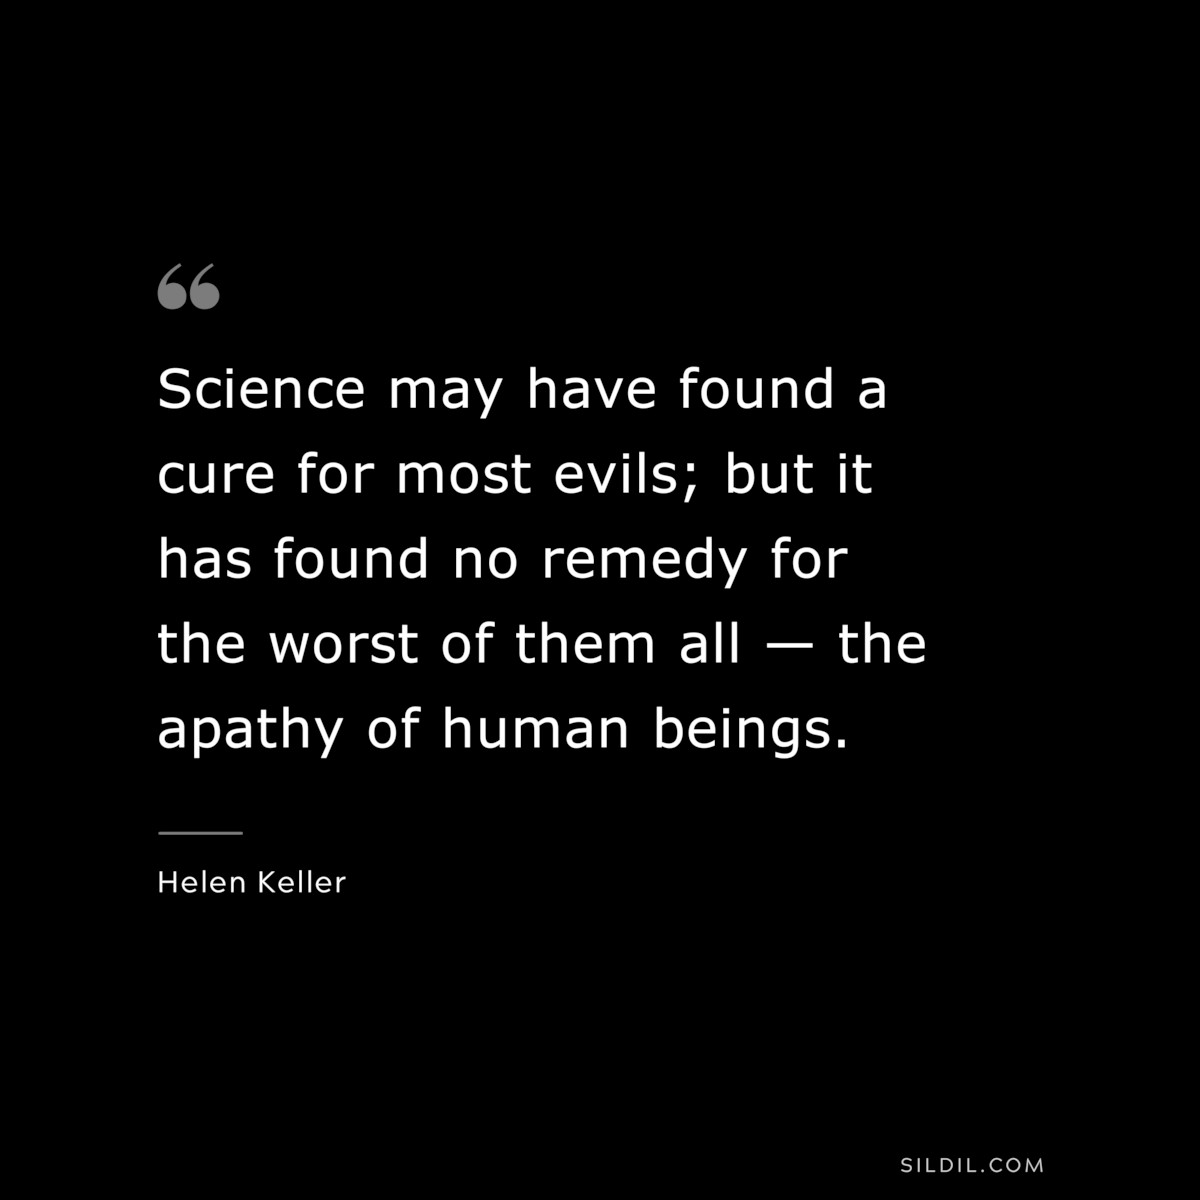 Science may have found a cure for most evils; but it has found no remedy for the worst of them all — the apathy of human beings. ― Helen Keller